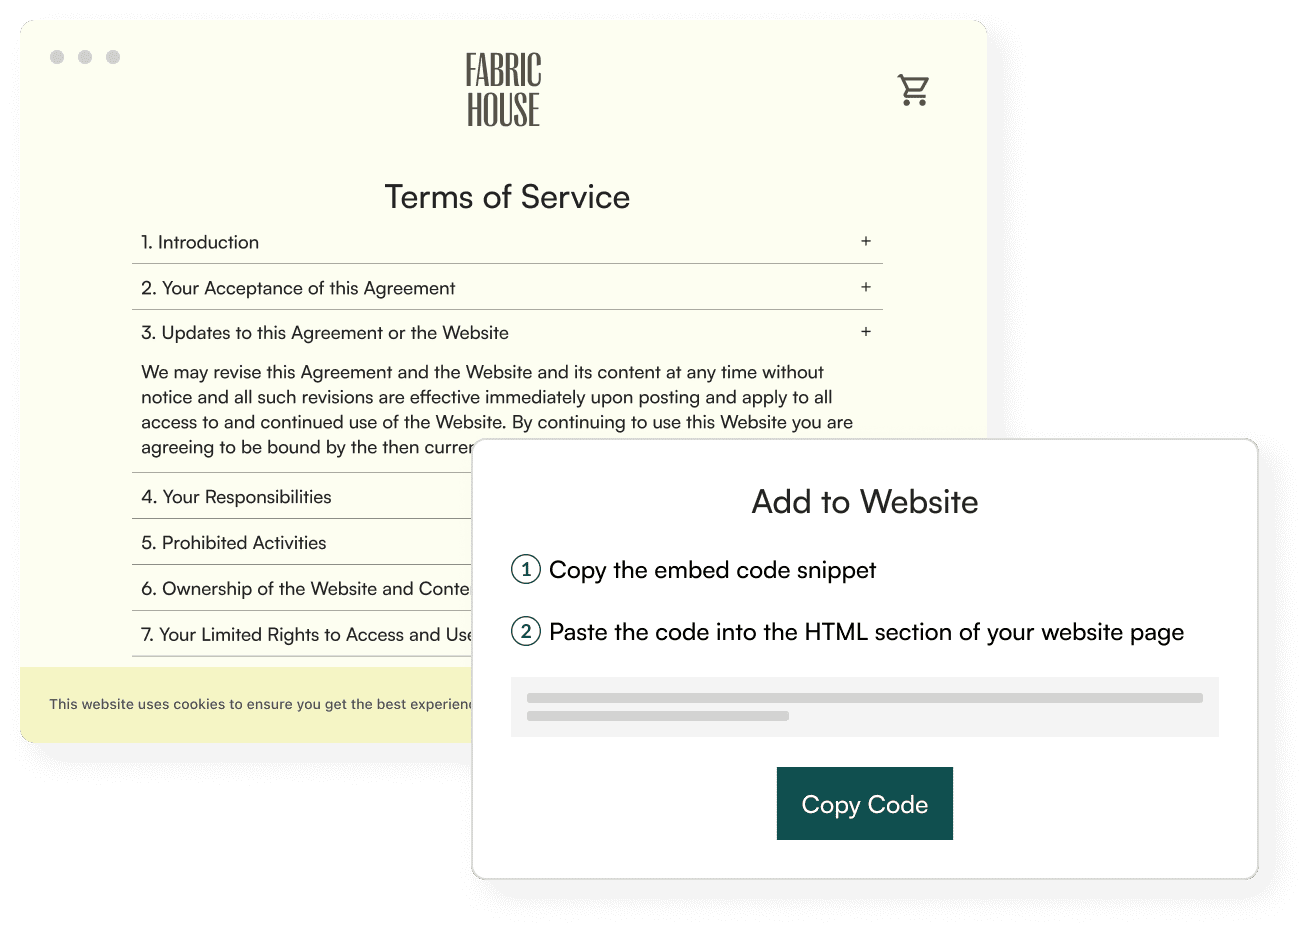 Terms of service + add to site (2)